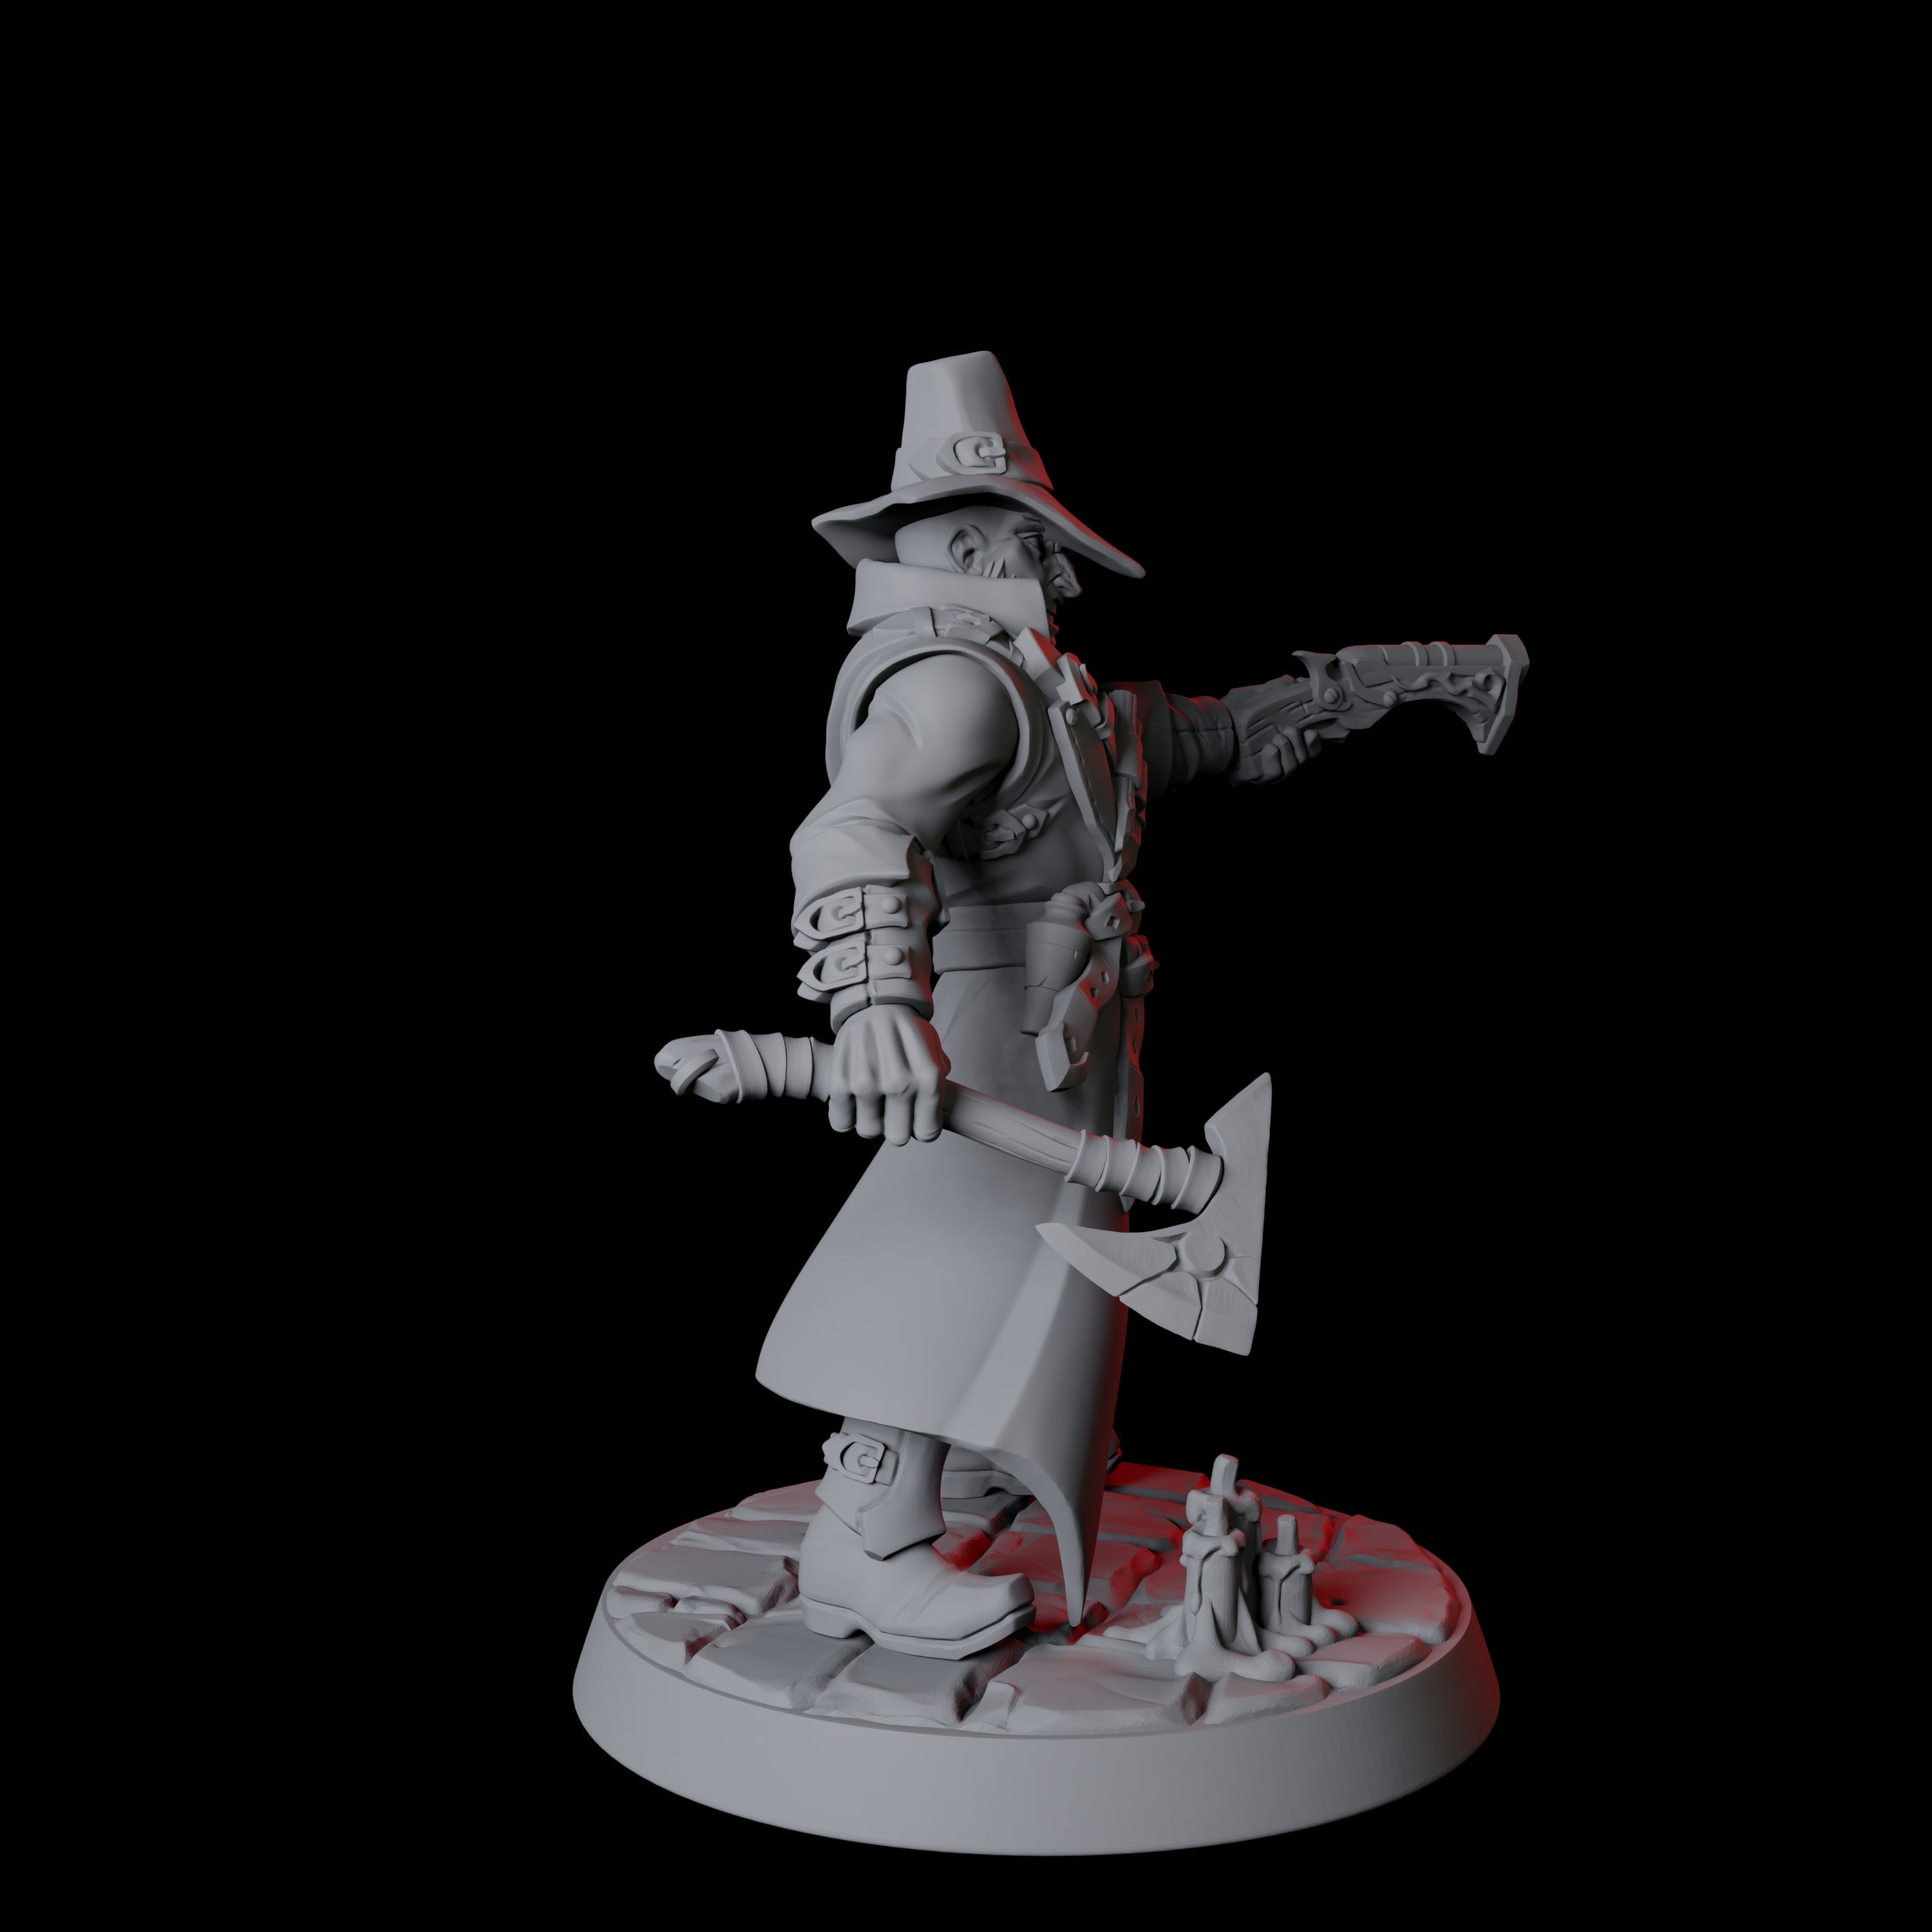 Vampire Hunter B Miniature for Dungeons and Dragons, Pathfinder or other TTRPGs